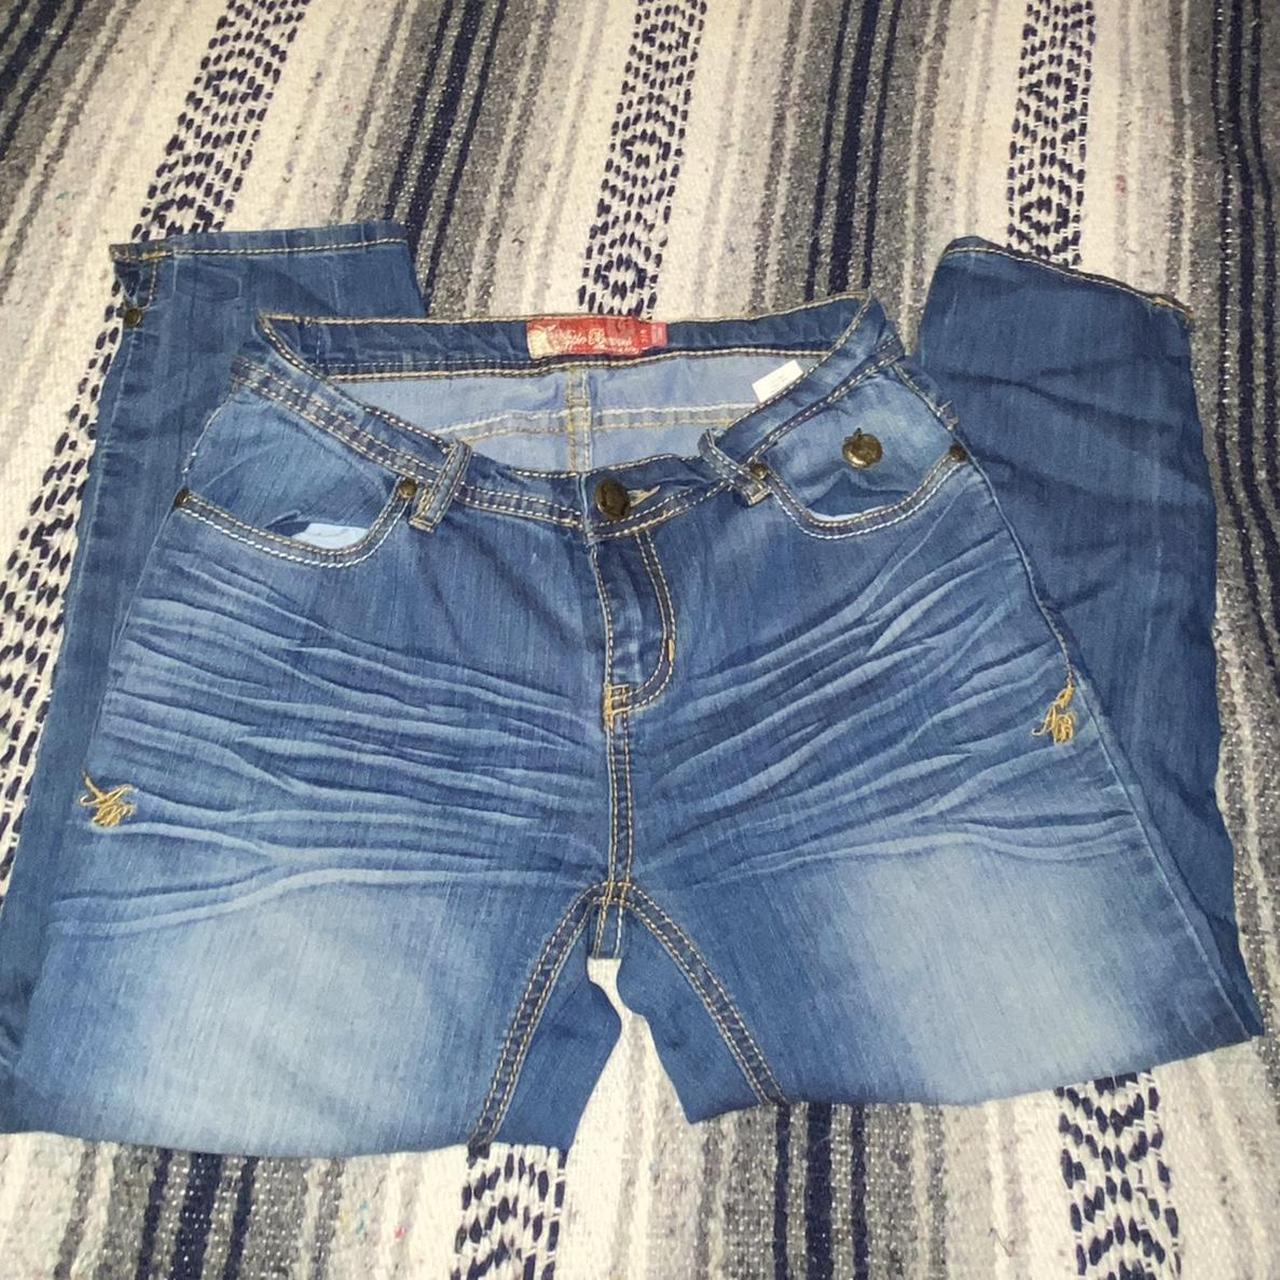 Apple Bottoms Women's Blue and Gold Jeans (2)